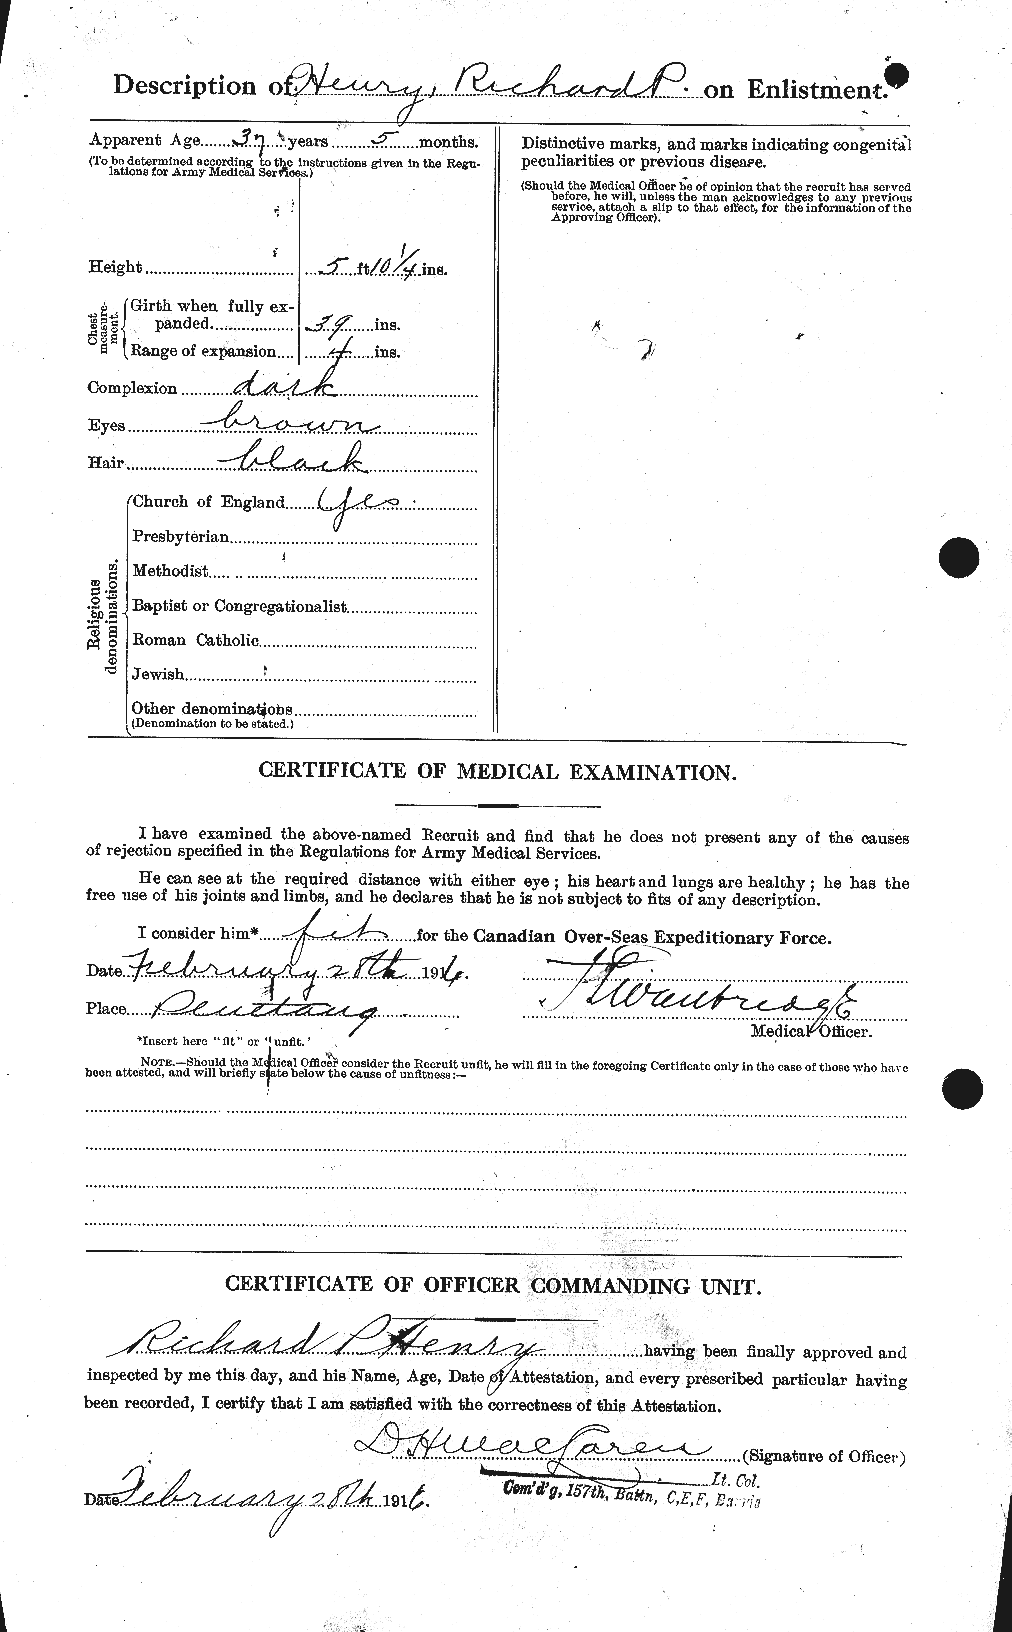 Personnel Records of the First World War - CEF 387698b